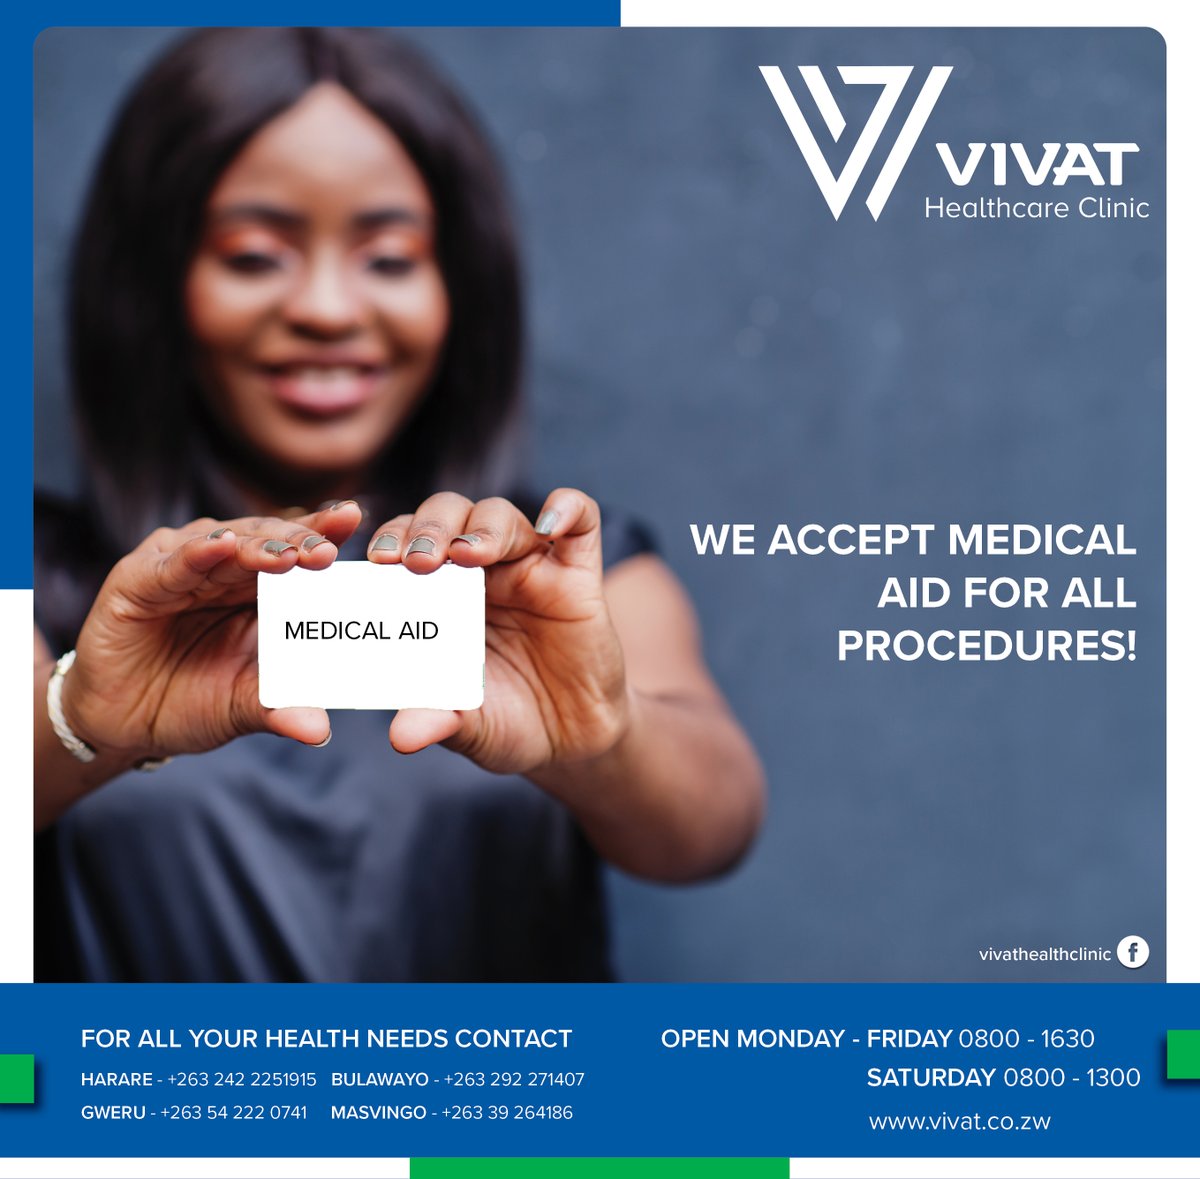 Did you know: At VIVAT Health Clinics we accept other Medical Aid members such as Bonvie, FML, Generation, CIMAS, and Masca ( Note that your medical Aid has to get into an agreement with the Healthcare Services Division first before your card can be accepted.